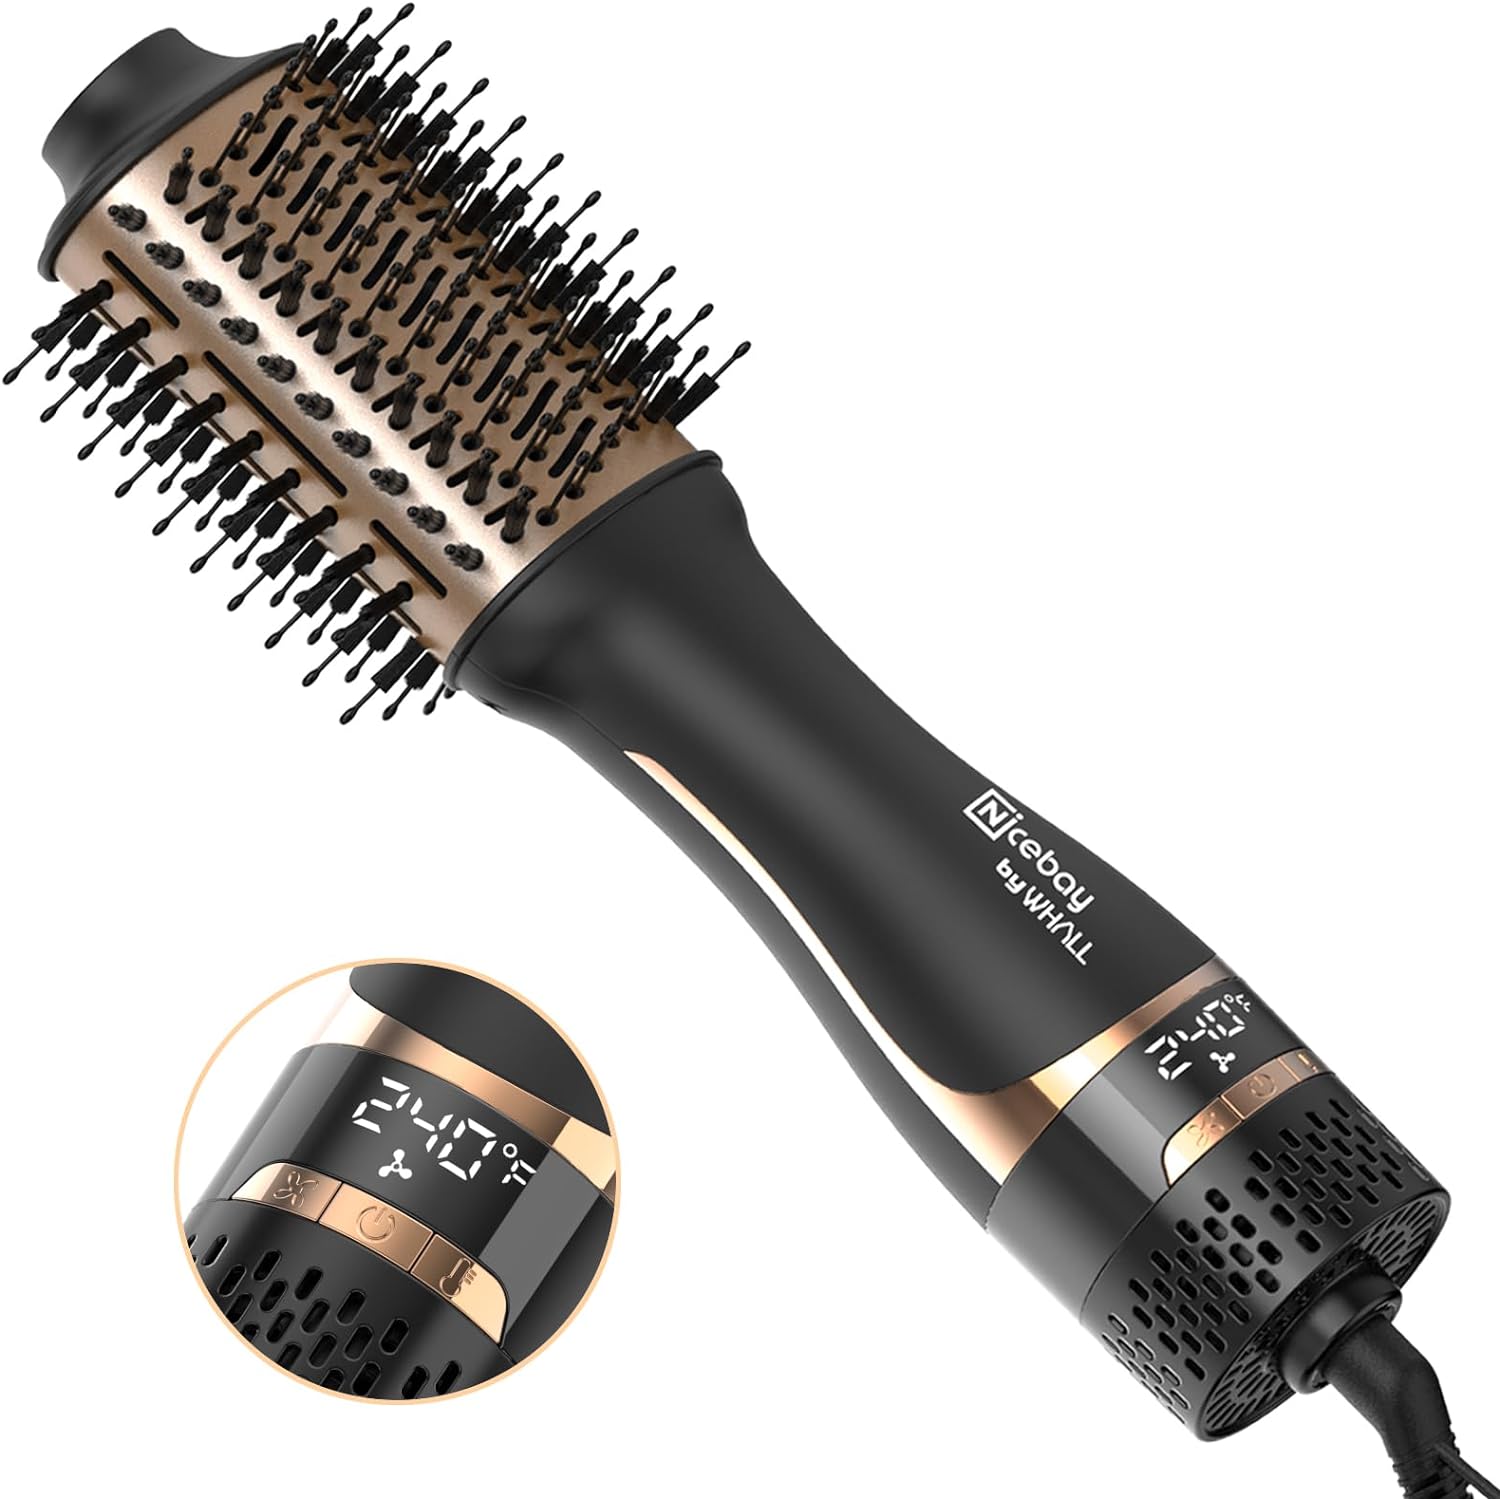 Nicebay®HB-822 Hair Dryer Brush Blow Dryer Brush in One, Hot Tools Blow Dryer Brush for Women, One Step Blowout Brush with a Display Screen, Oval Ceramic Barrel,Negative Ion, Black and Gold